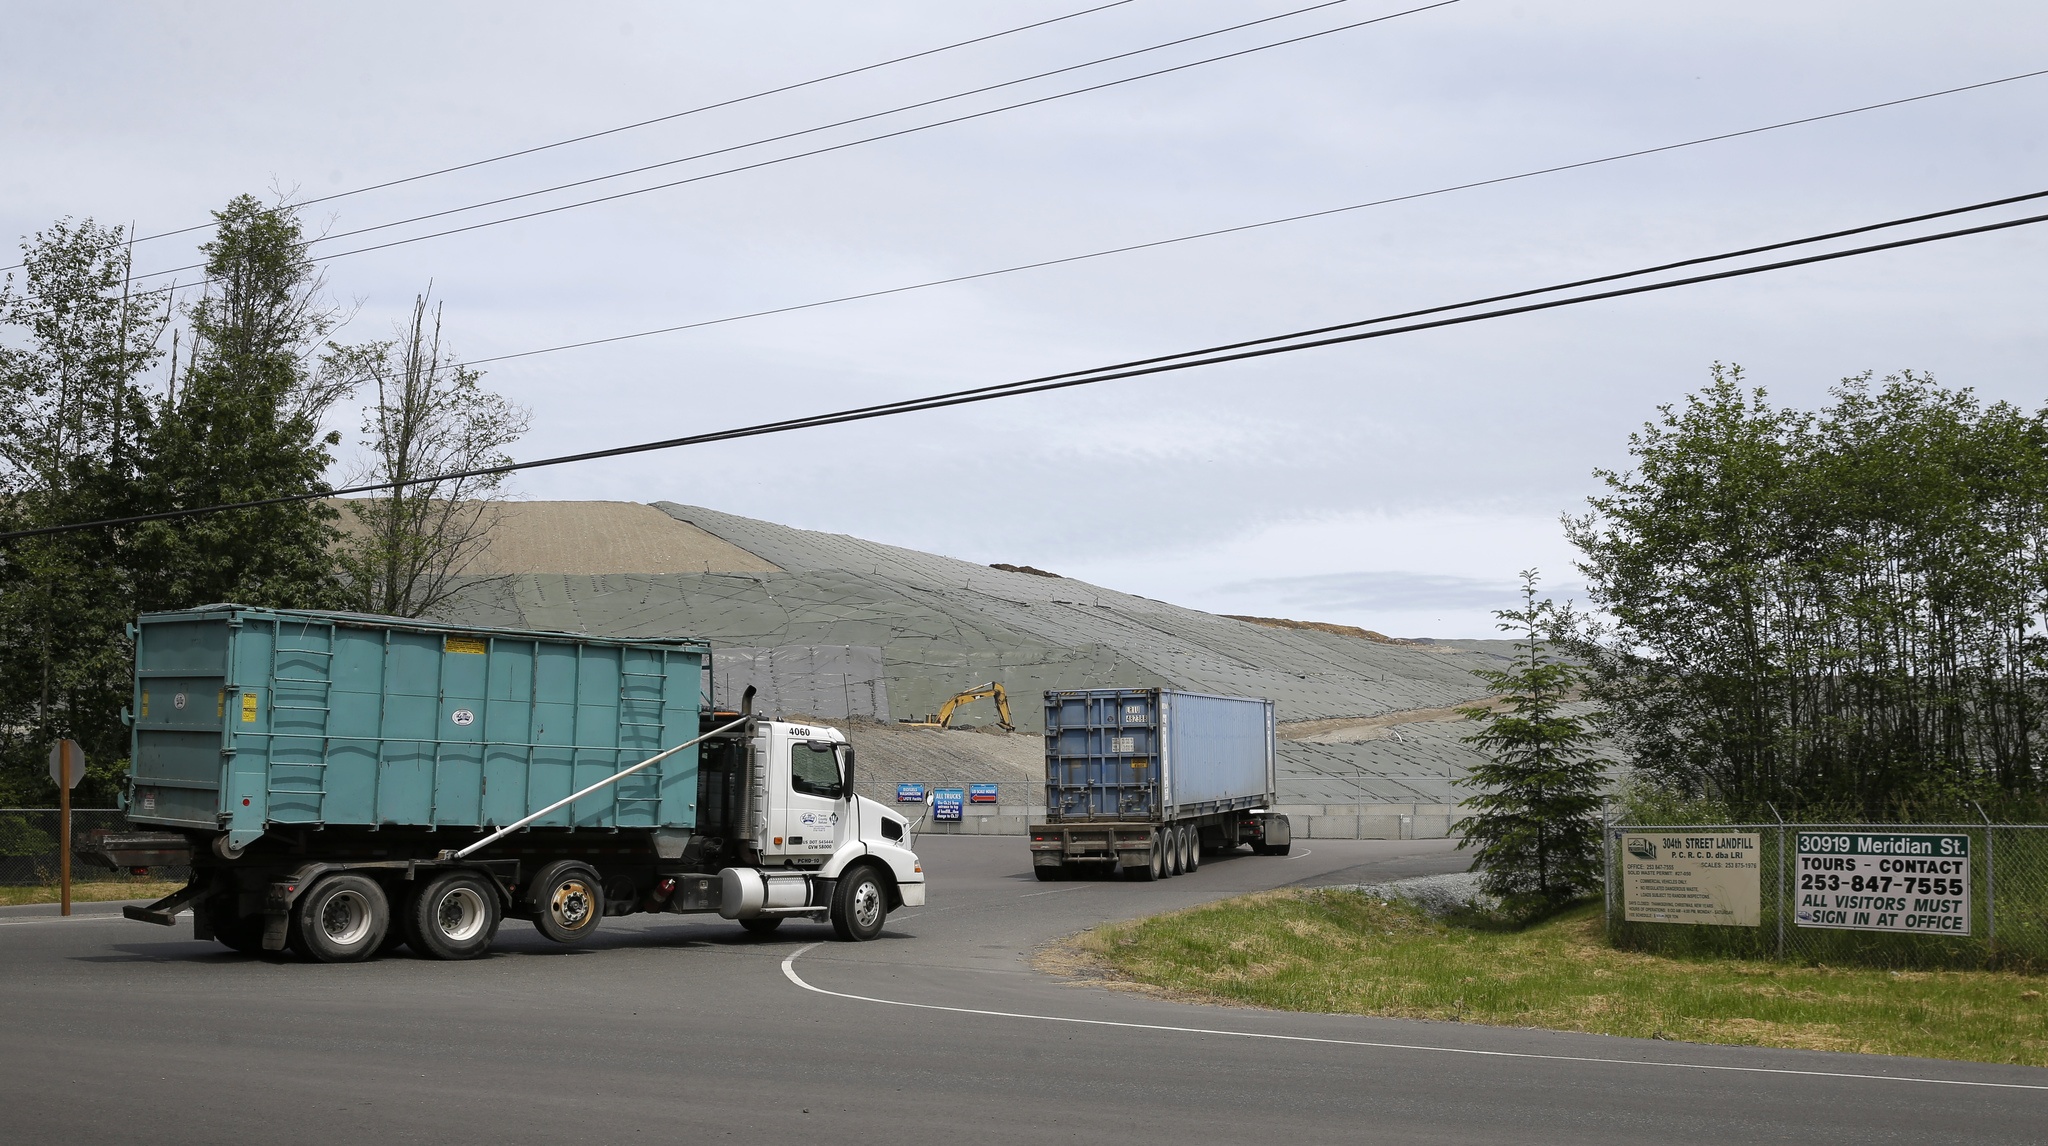 In this June 1 photo, trucks enter the LRI landfill in Graham. Washington state environmental regulators finalized a new rule Thursday to limit greenhouse gas emissions from large emitters, including the landfill. (Ted S. Warren/The Associated Press)